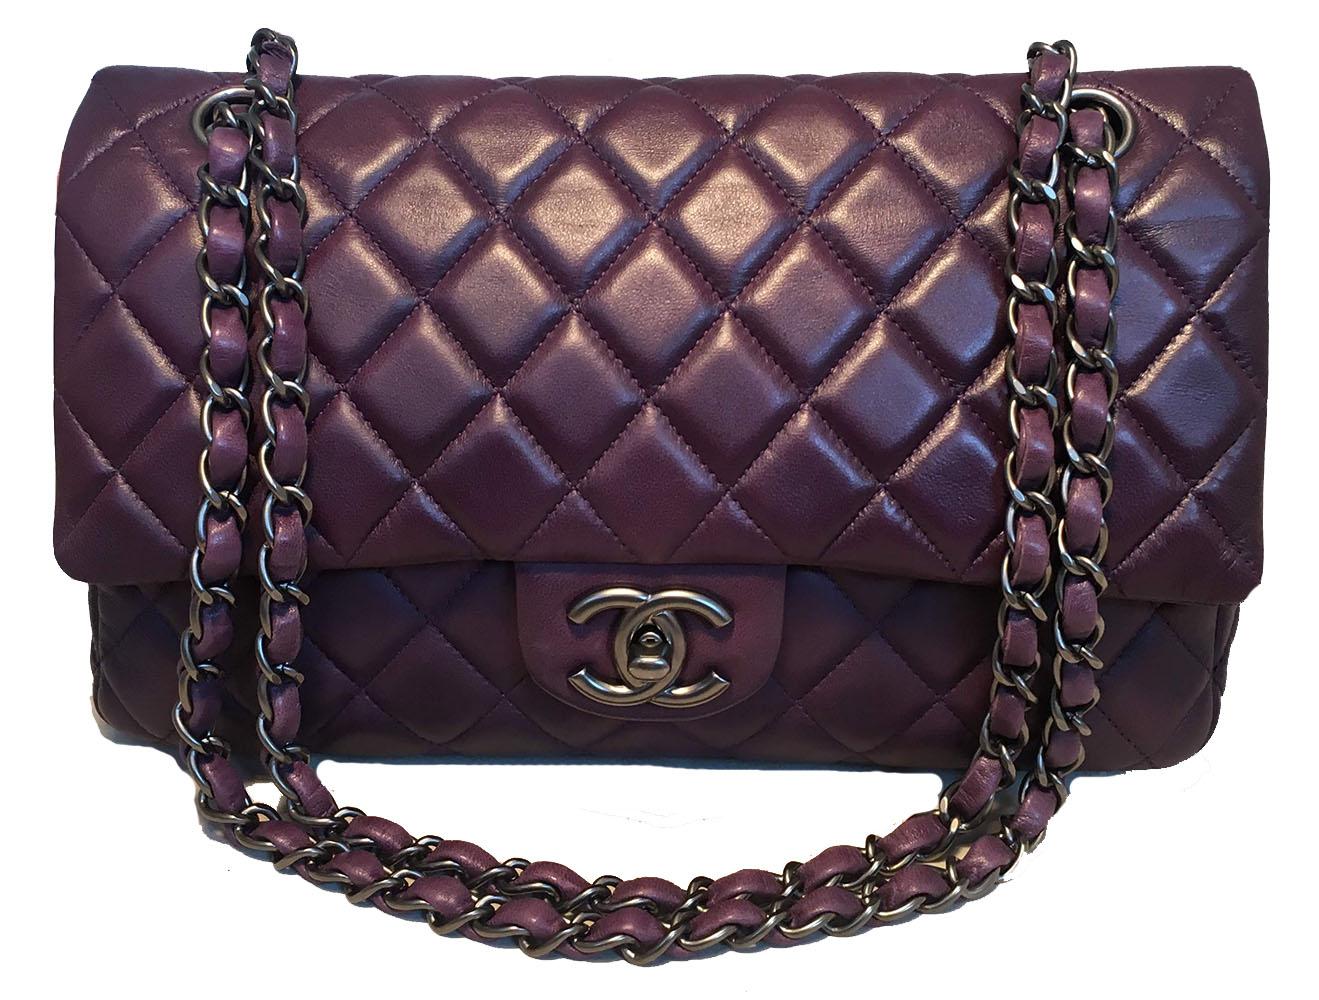 Chanel Purple 10 inch 2.55 Double Flap Classic Shoulder Bag in excellent condition. Purple quilted lambskin leather exterior trimmed with matte silver hardware. Signature woven chain and leather shoulder strap and twisting CC logo front closure.